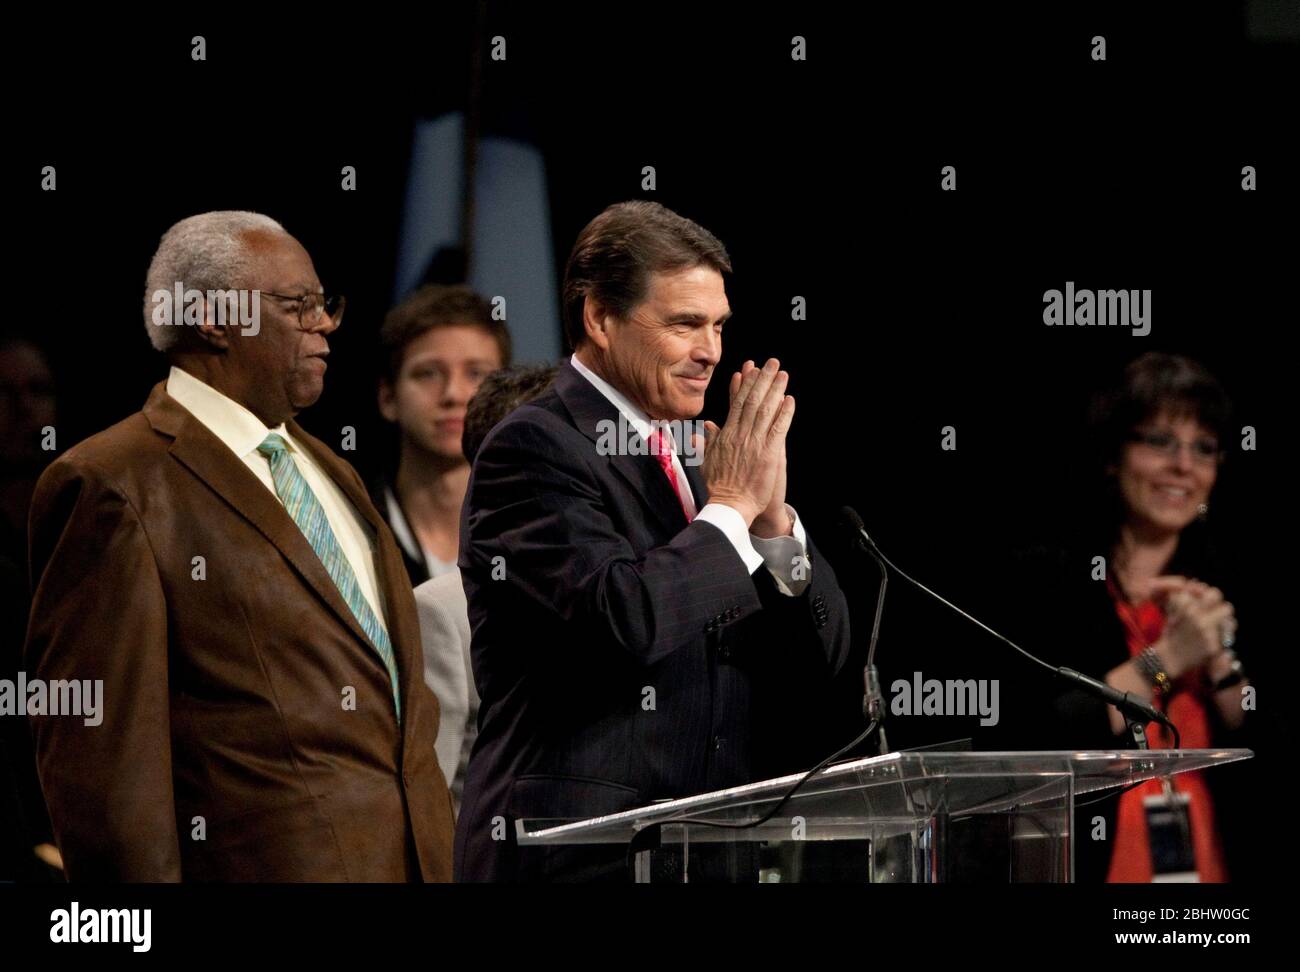 Houston, Texas USA, August 6, 2011: Texas Governor Rick Perry speaks at The Response, a day-long 'call to prayer for a nation in crisis' that attracted over 30,000 worshippers to hear prayers, gospel music and conservative evangelic speakers at Reliant Stadium. Demonstrators outside the arena protested Perry's mixing government and religion by appearing prominently at a Christian prayer event. ©Bob Daemmrich Stock Photo